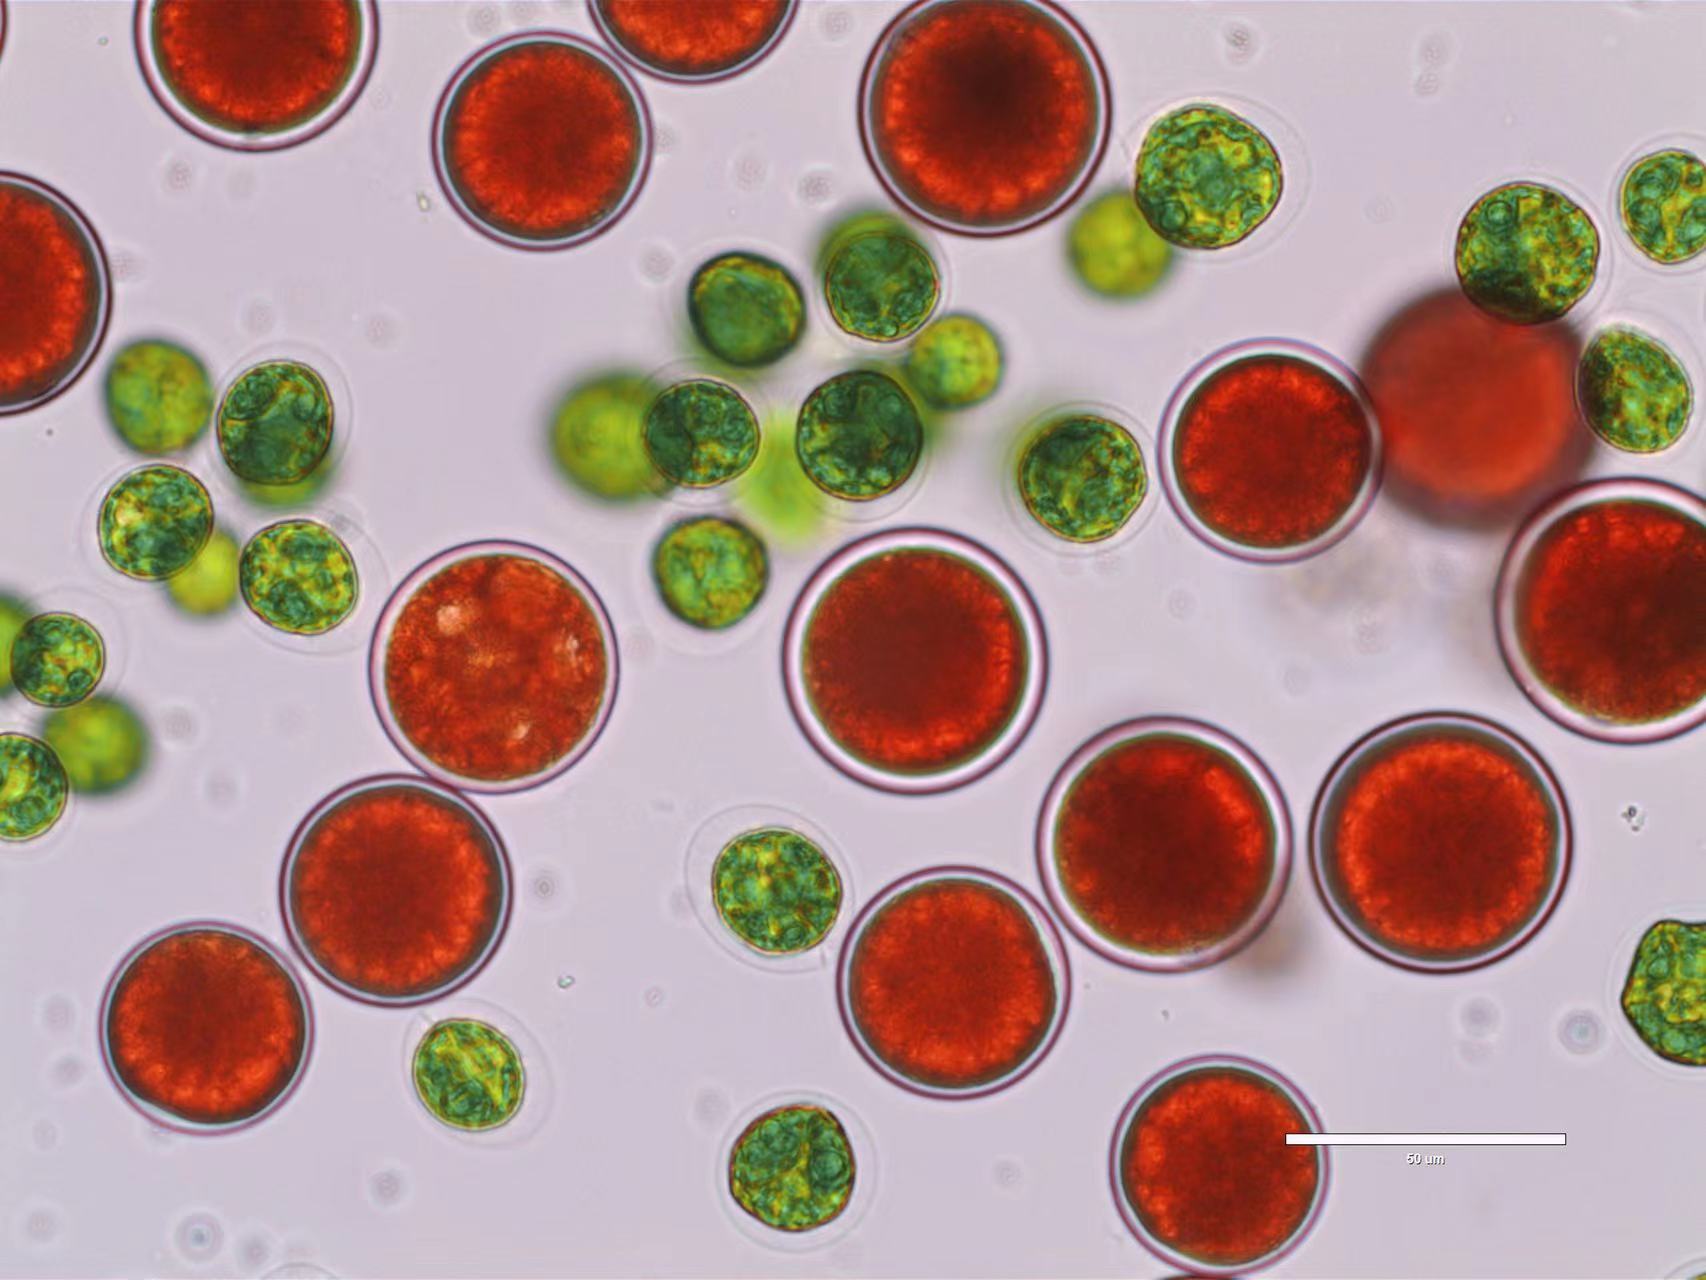 Study Proves That Red Light Promotes Growth of <EM>Haematococcus pluvialis</EM>